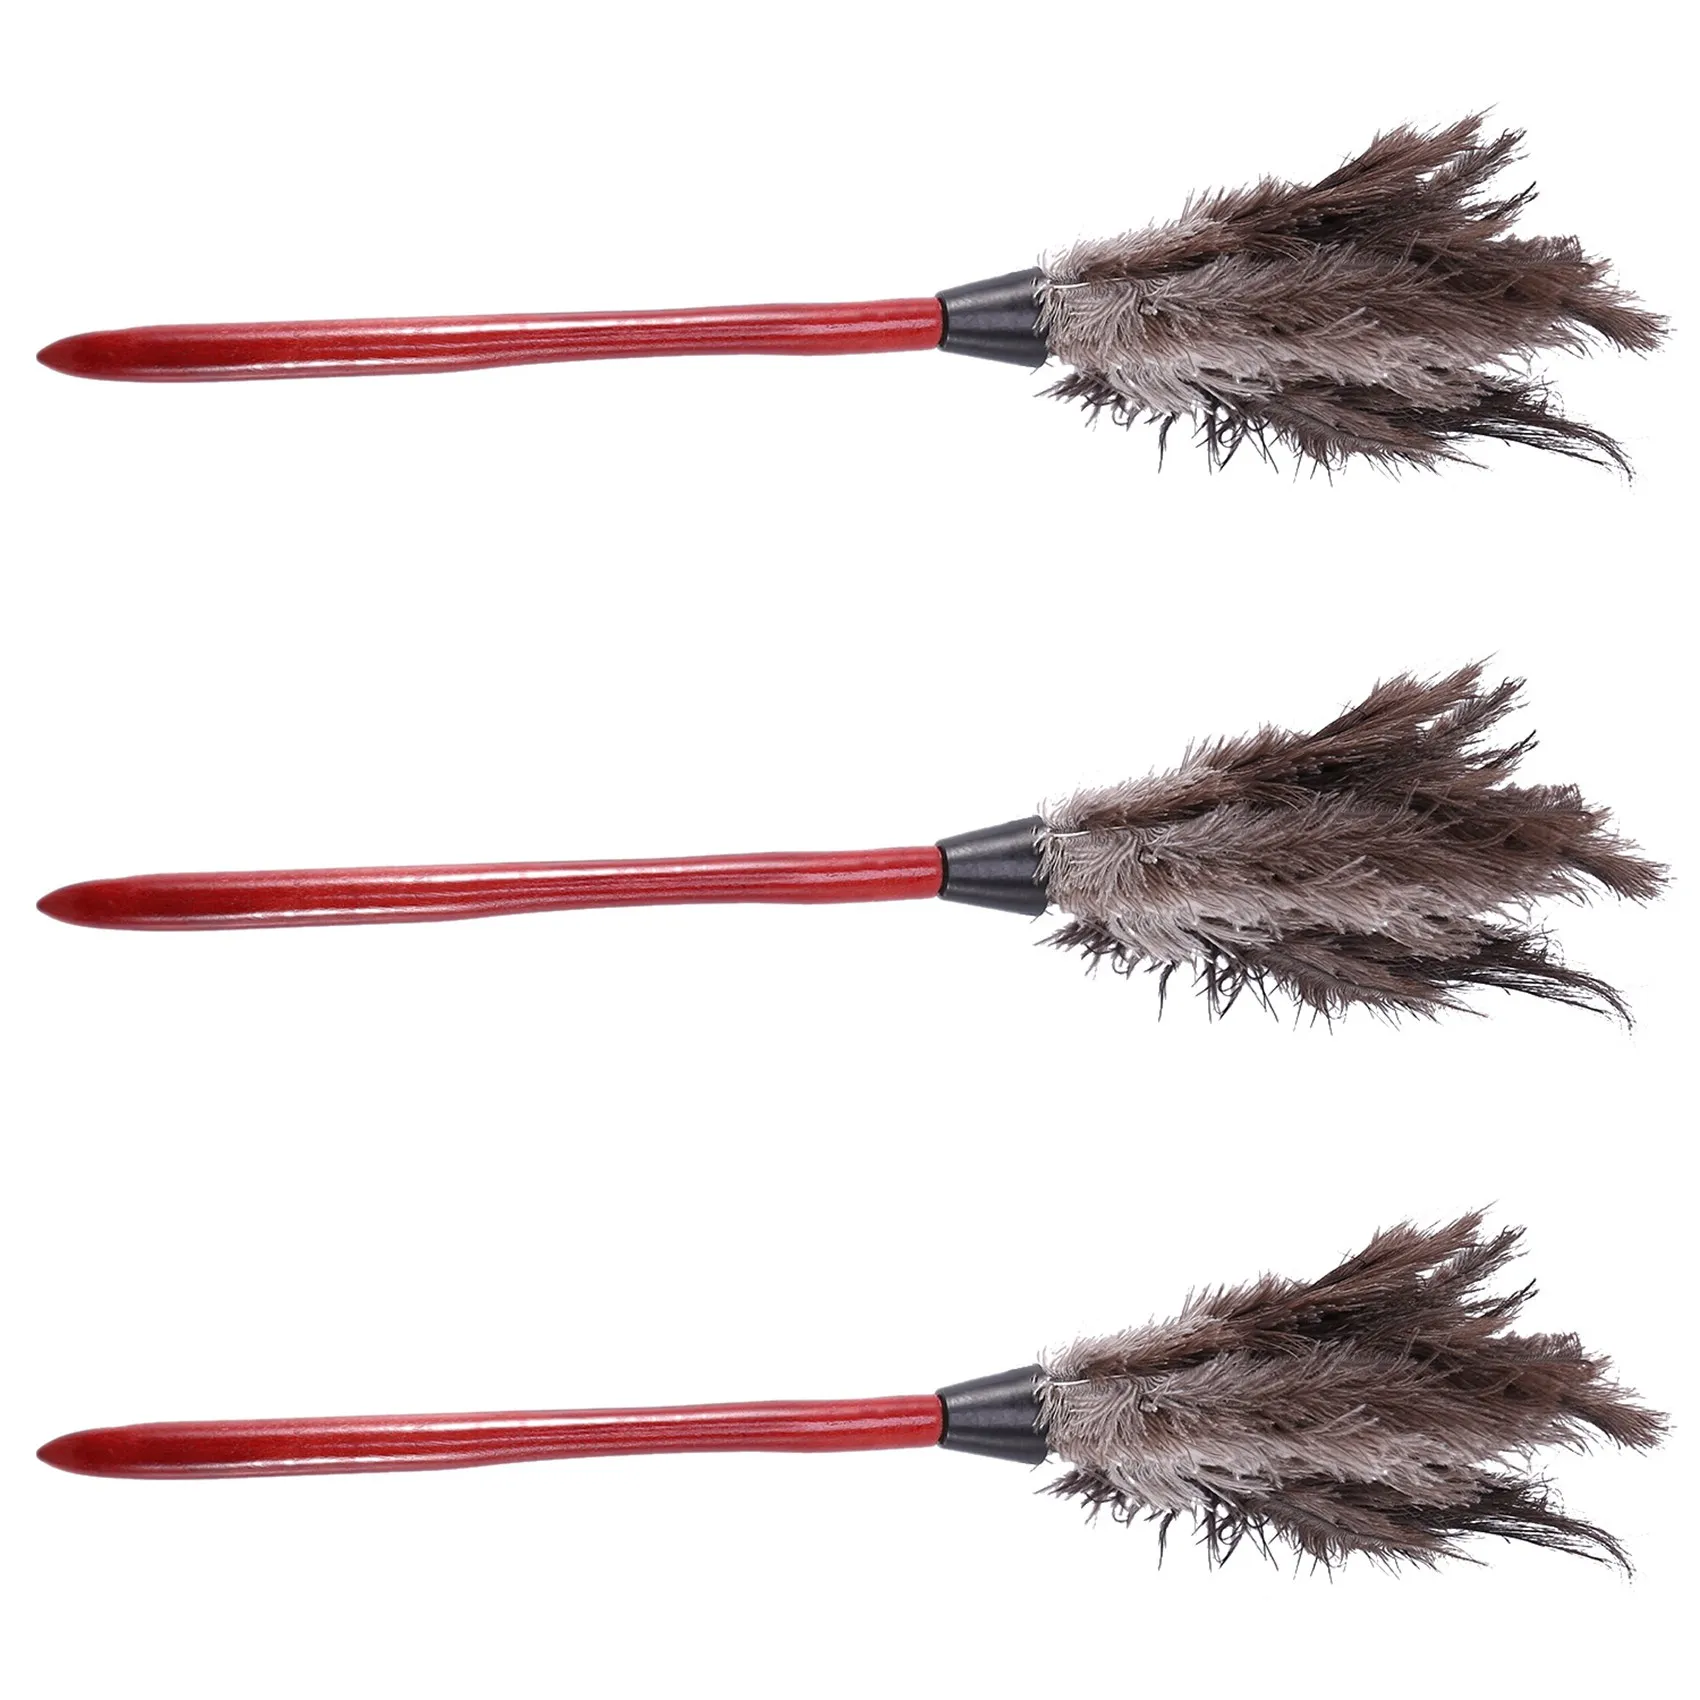 

3X Ostrich Cleaning Feather Duster Ostrich Duster Ostrich Feather Duster Soft Feathers Duster